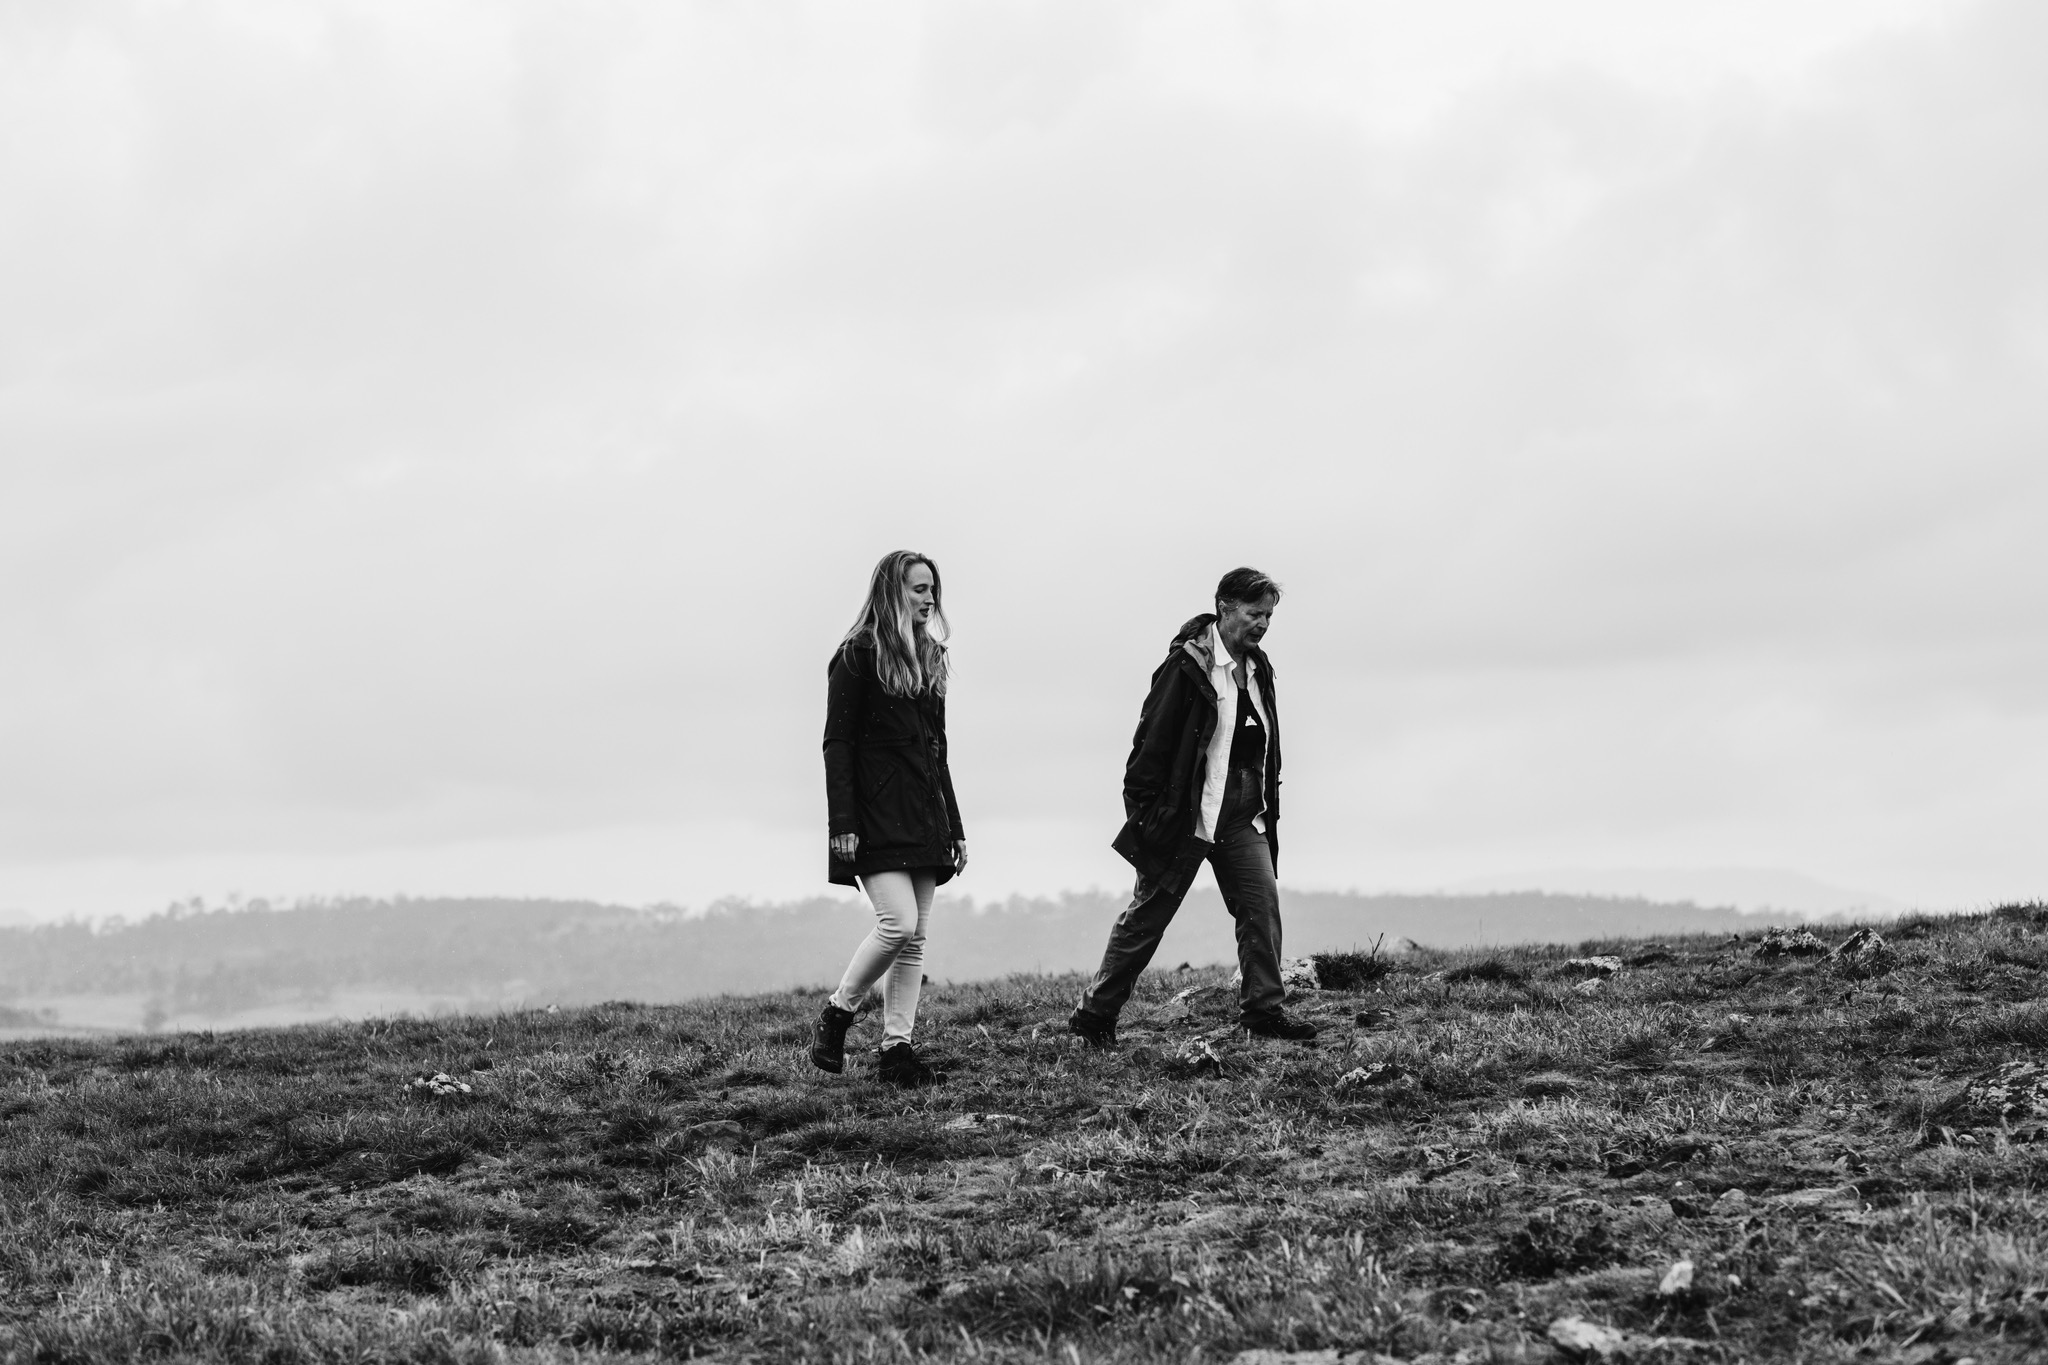 Black and white image featuring two people walking in a scenic landscape.